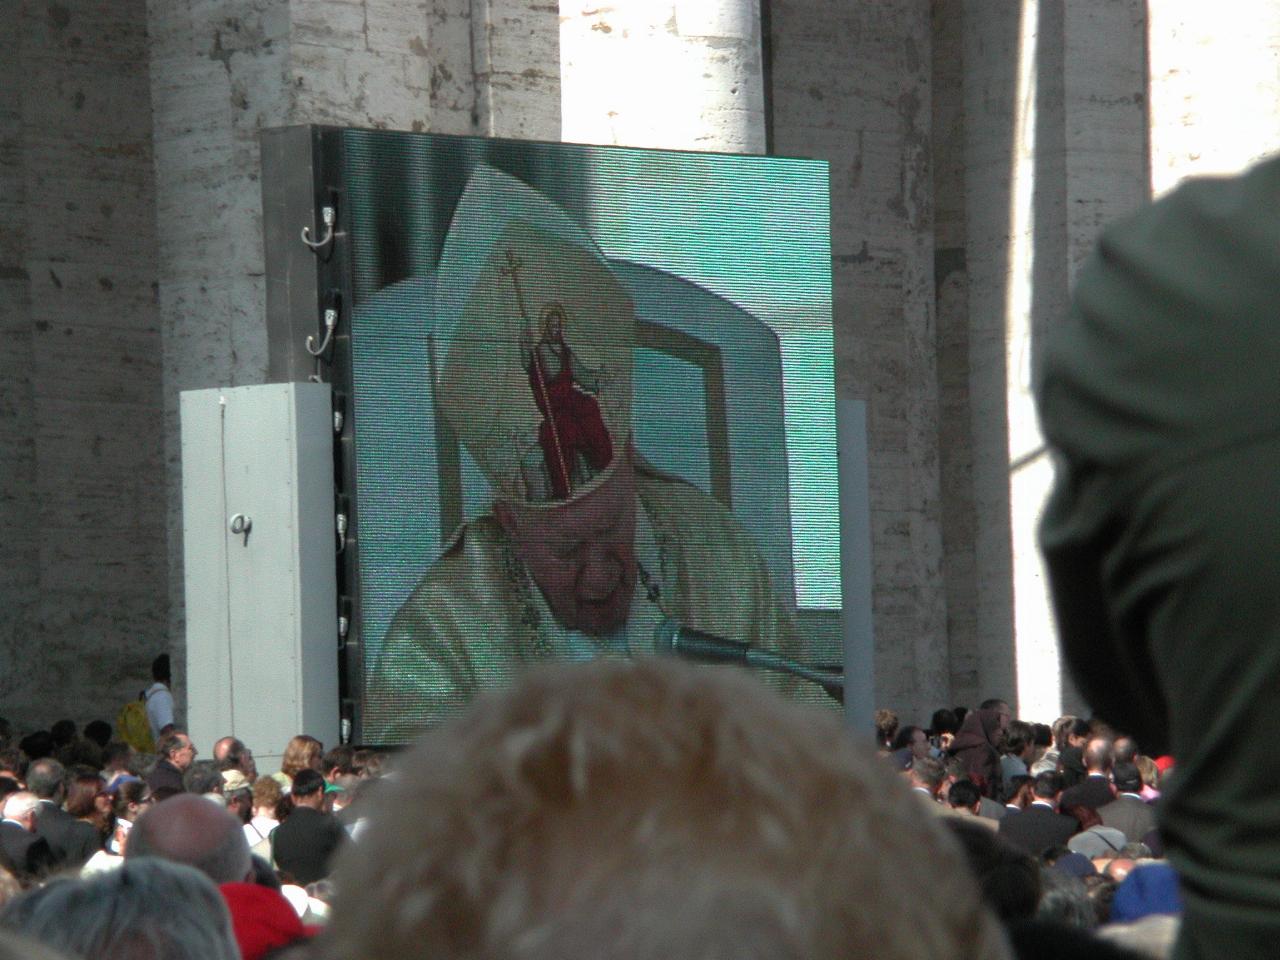 Pope John Paul II on the dias for canonisation Mass on TV screens